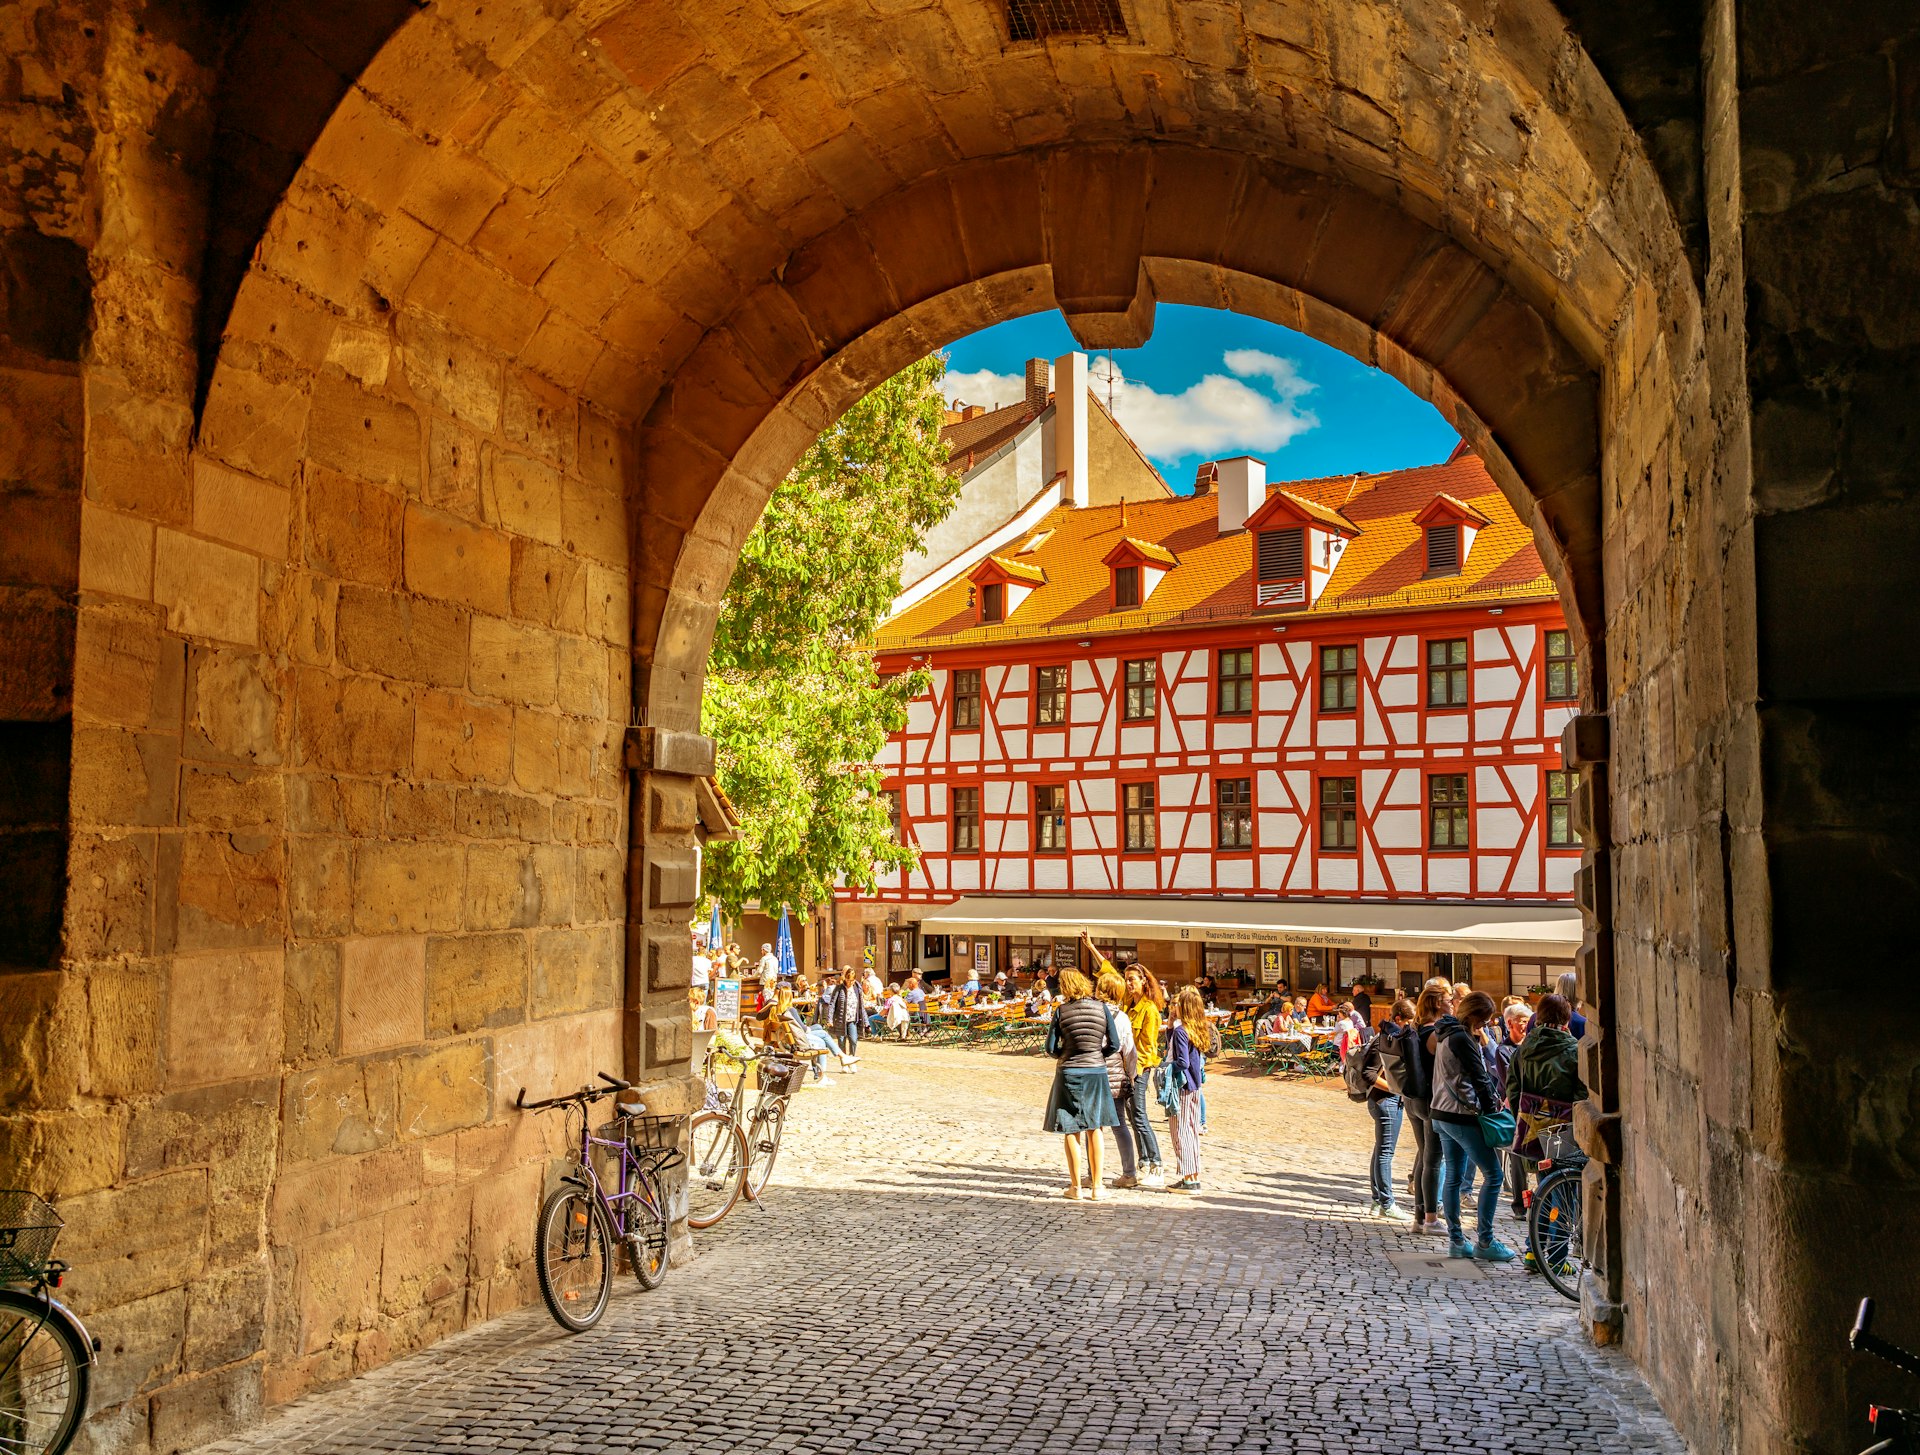 The historic center of the medieval city in Nuremberg, Germany